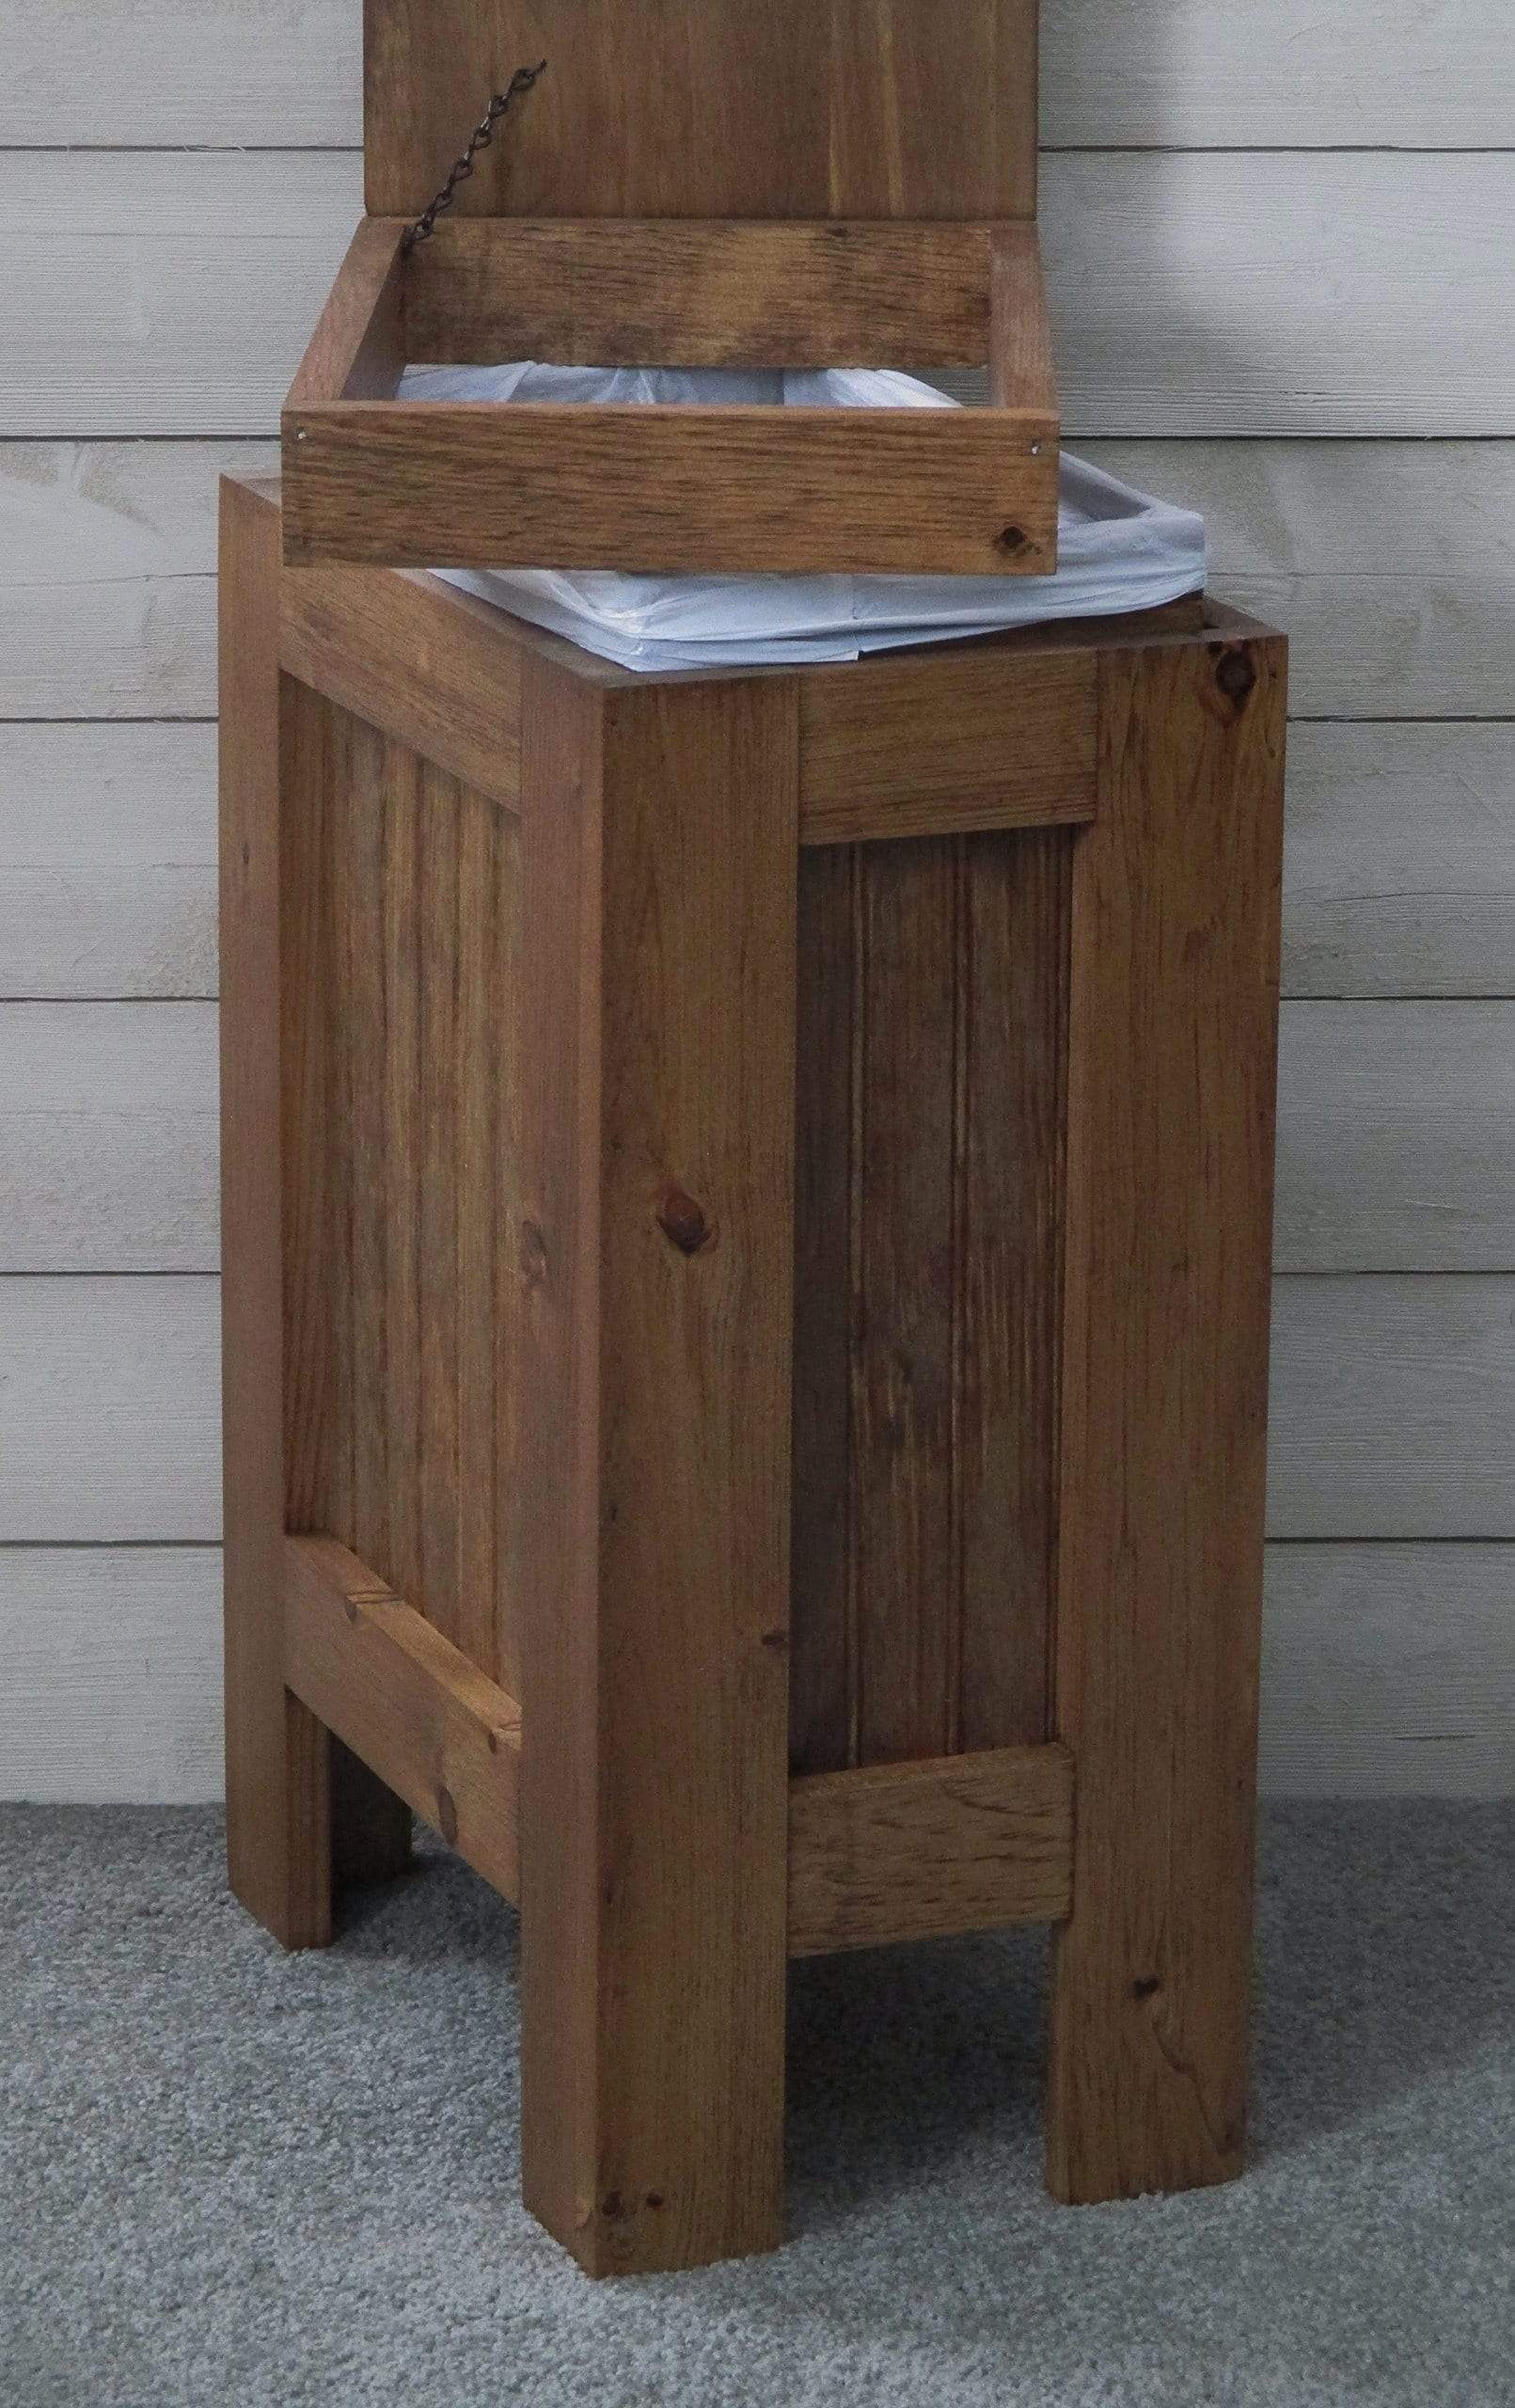 Get wood wooden trash bin kitchen garbage can 13 gallon recycle bin dog food storage early american stain rustic pine metal handle handmade in usa by buffalowoodshop